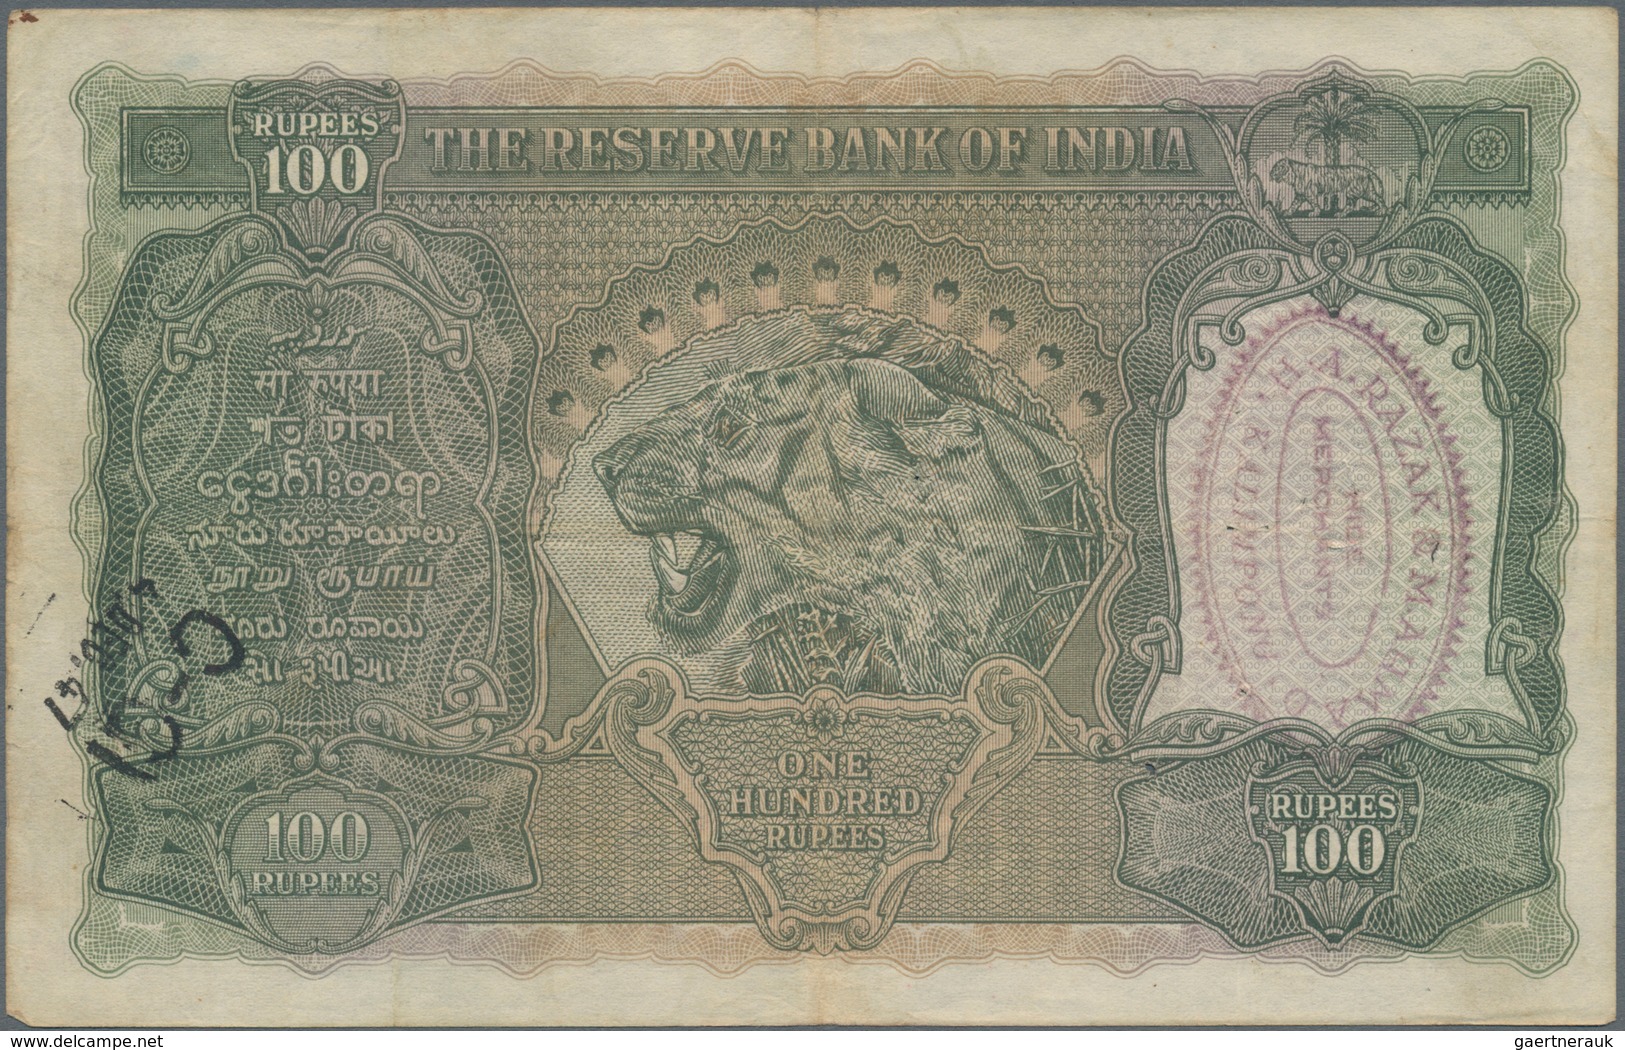 India / Indien: 100 Rupees ND(1937) Portrait KGIV P. 20g, CAWNPORE Issue, Used With Folds And Pinhol - Indien